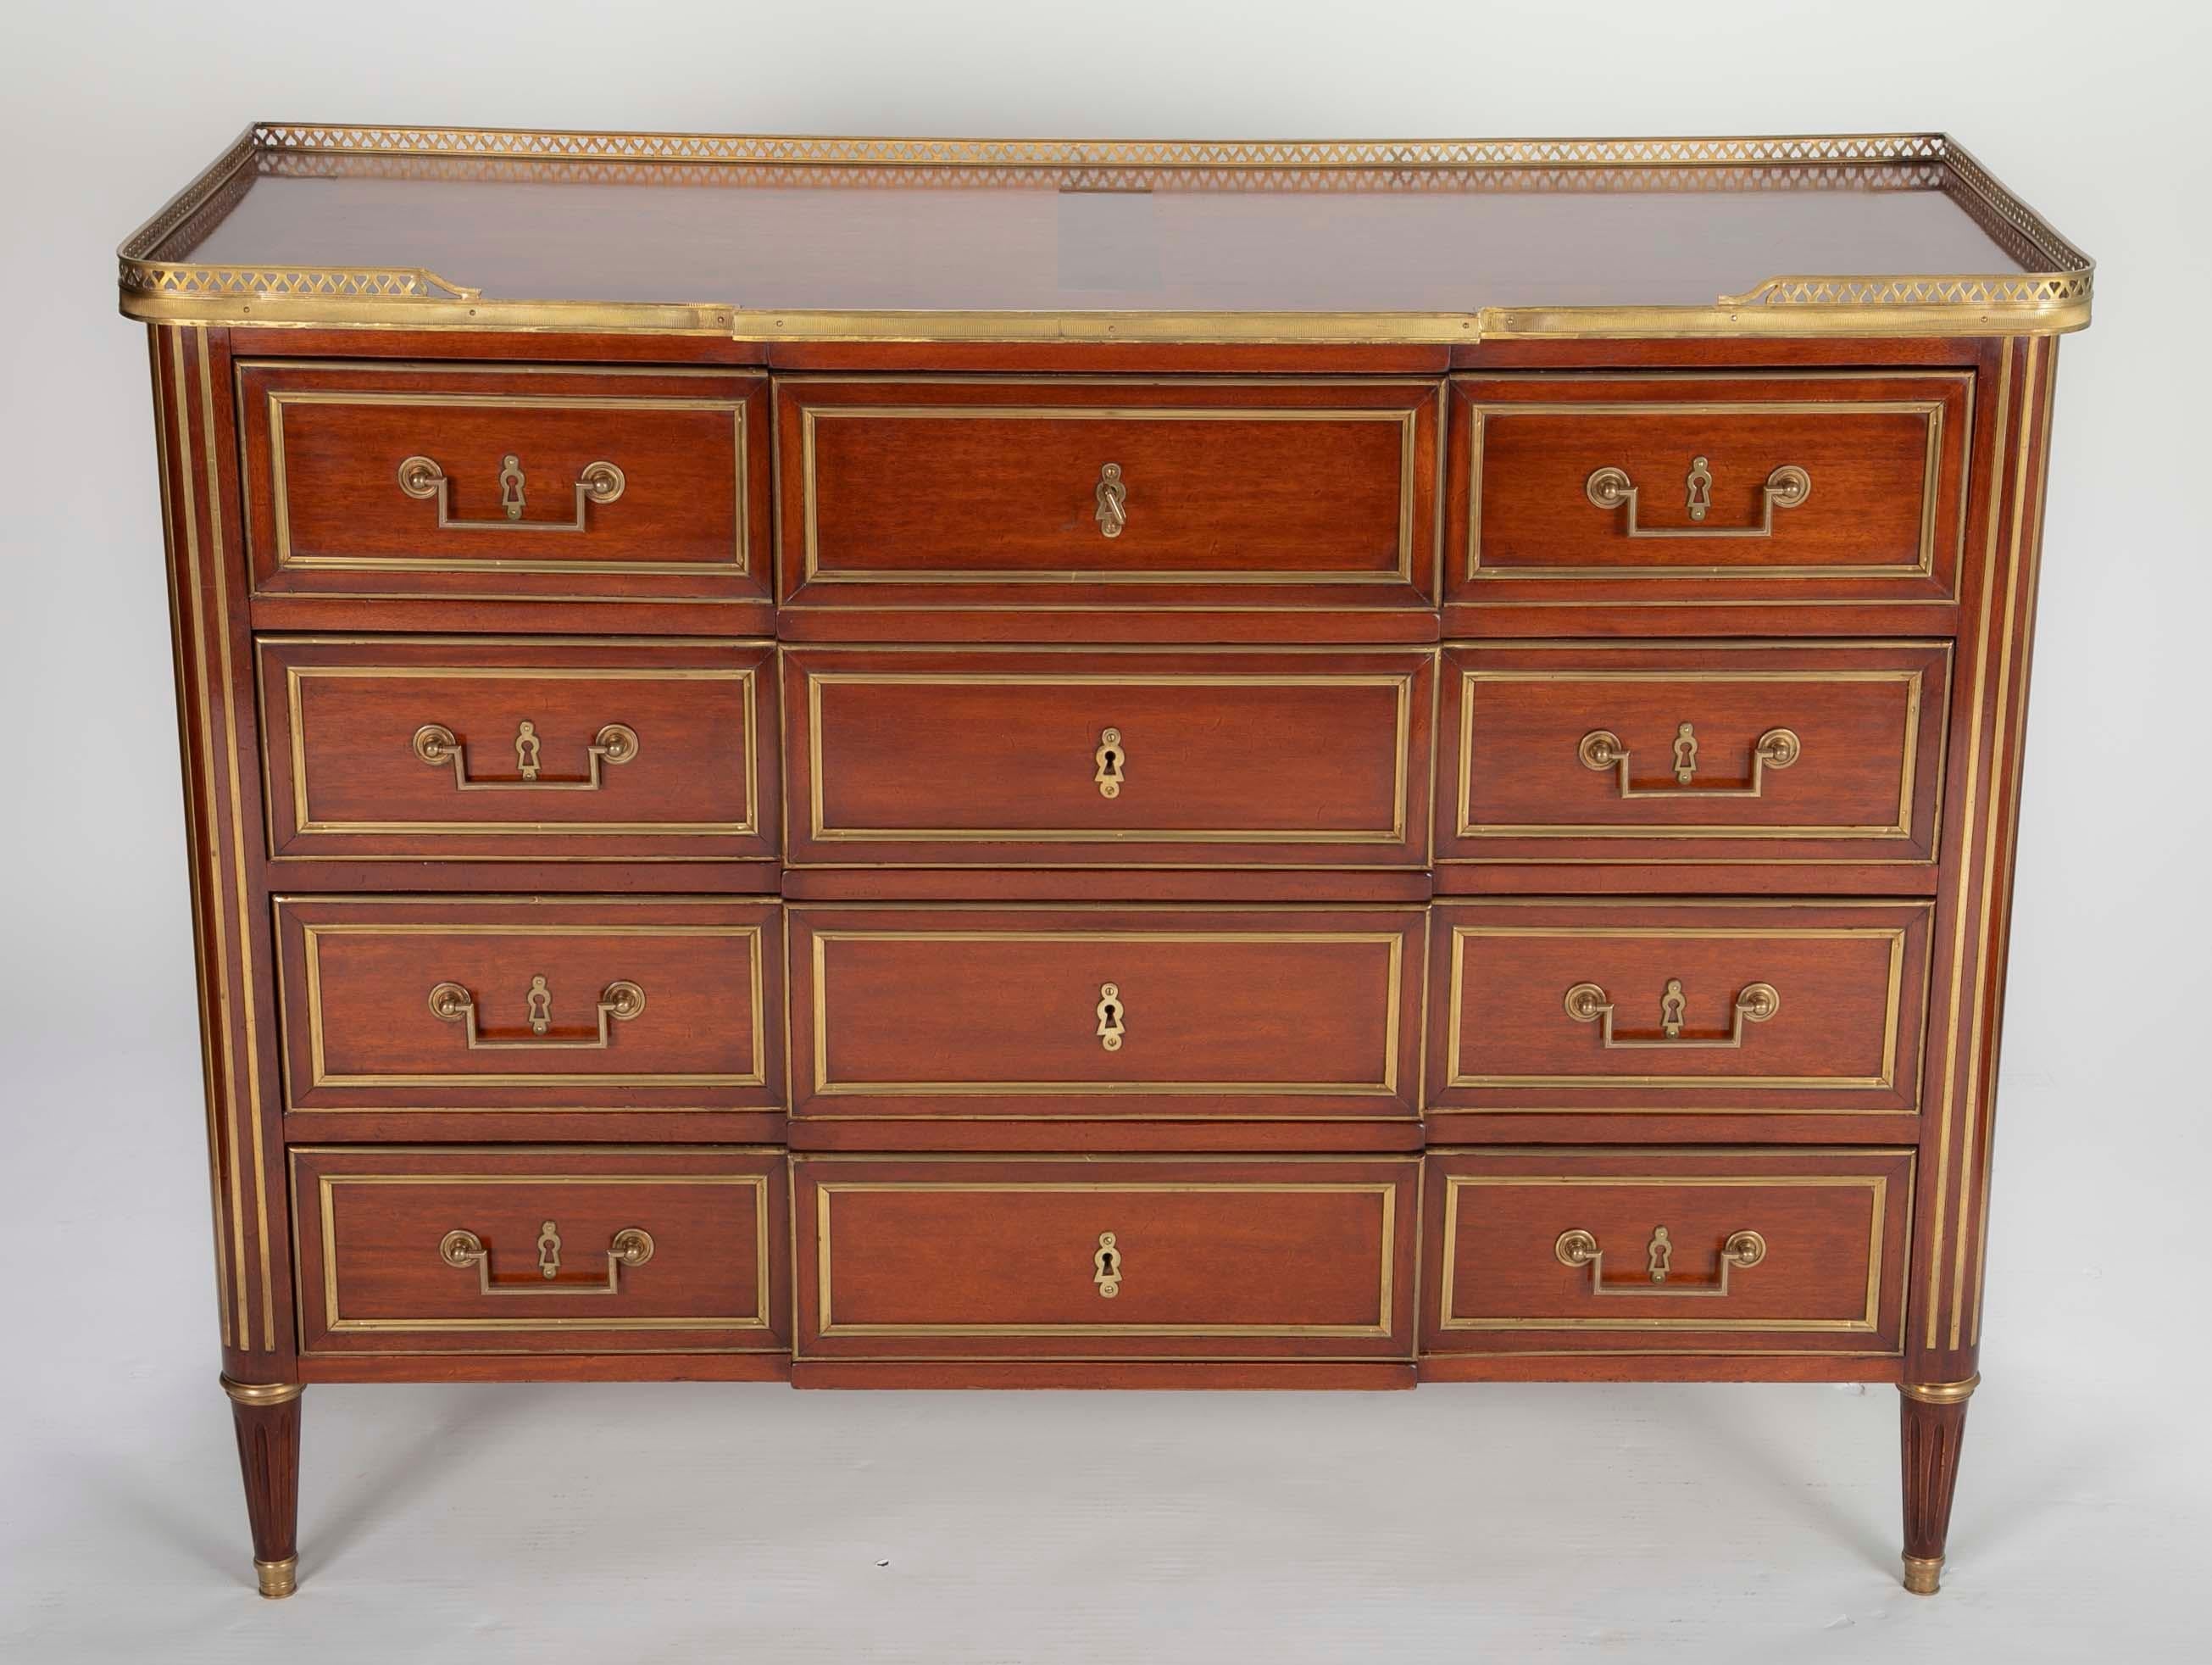 An early 20th century Louis XVI style mahogany chest with brass mounts and oak interior construction.